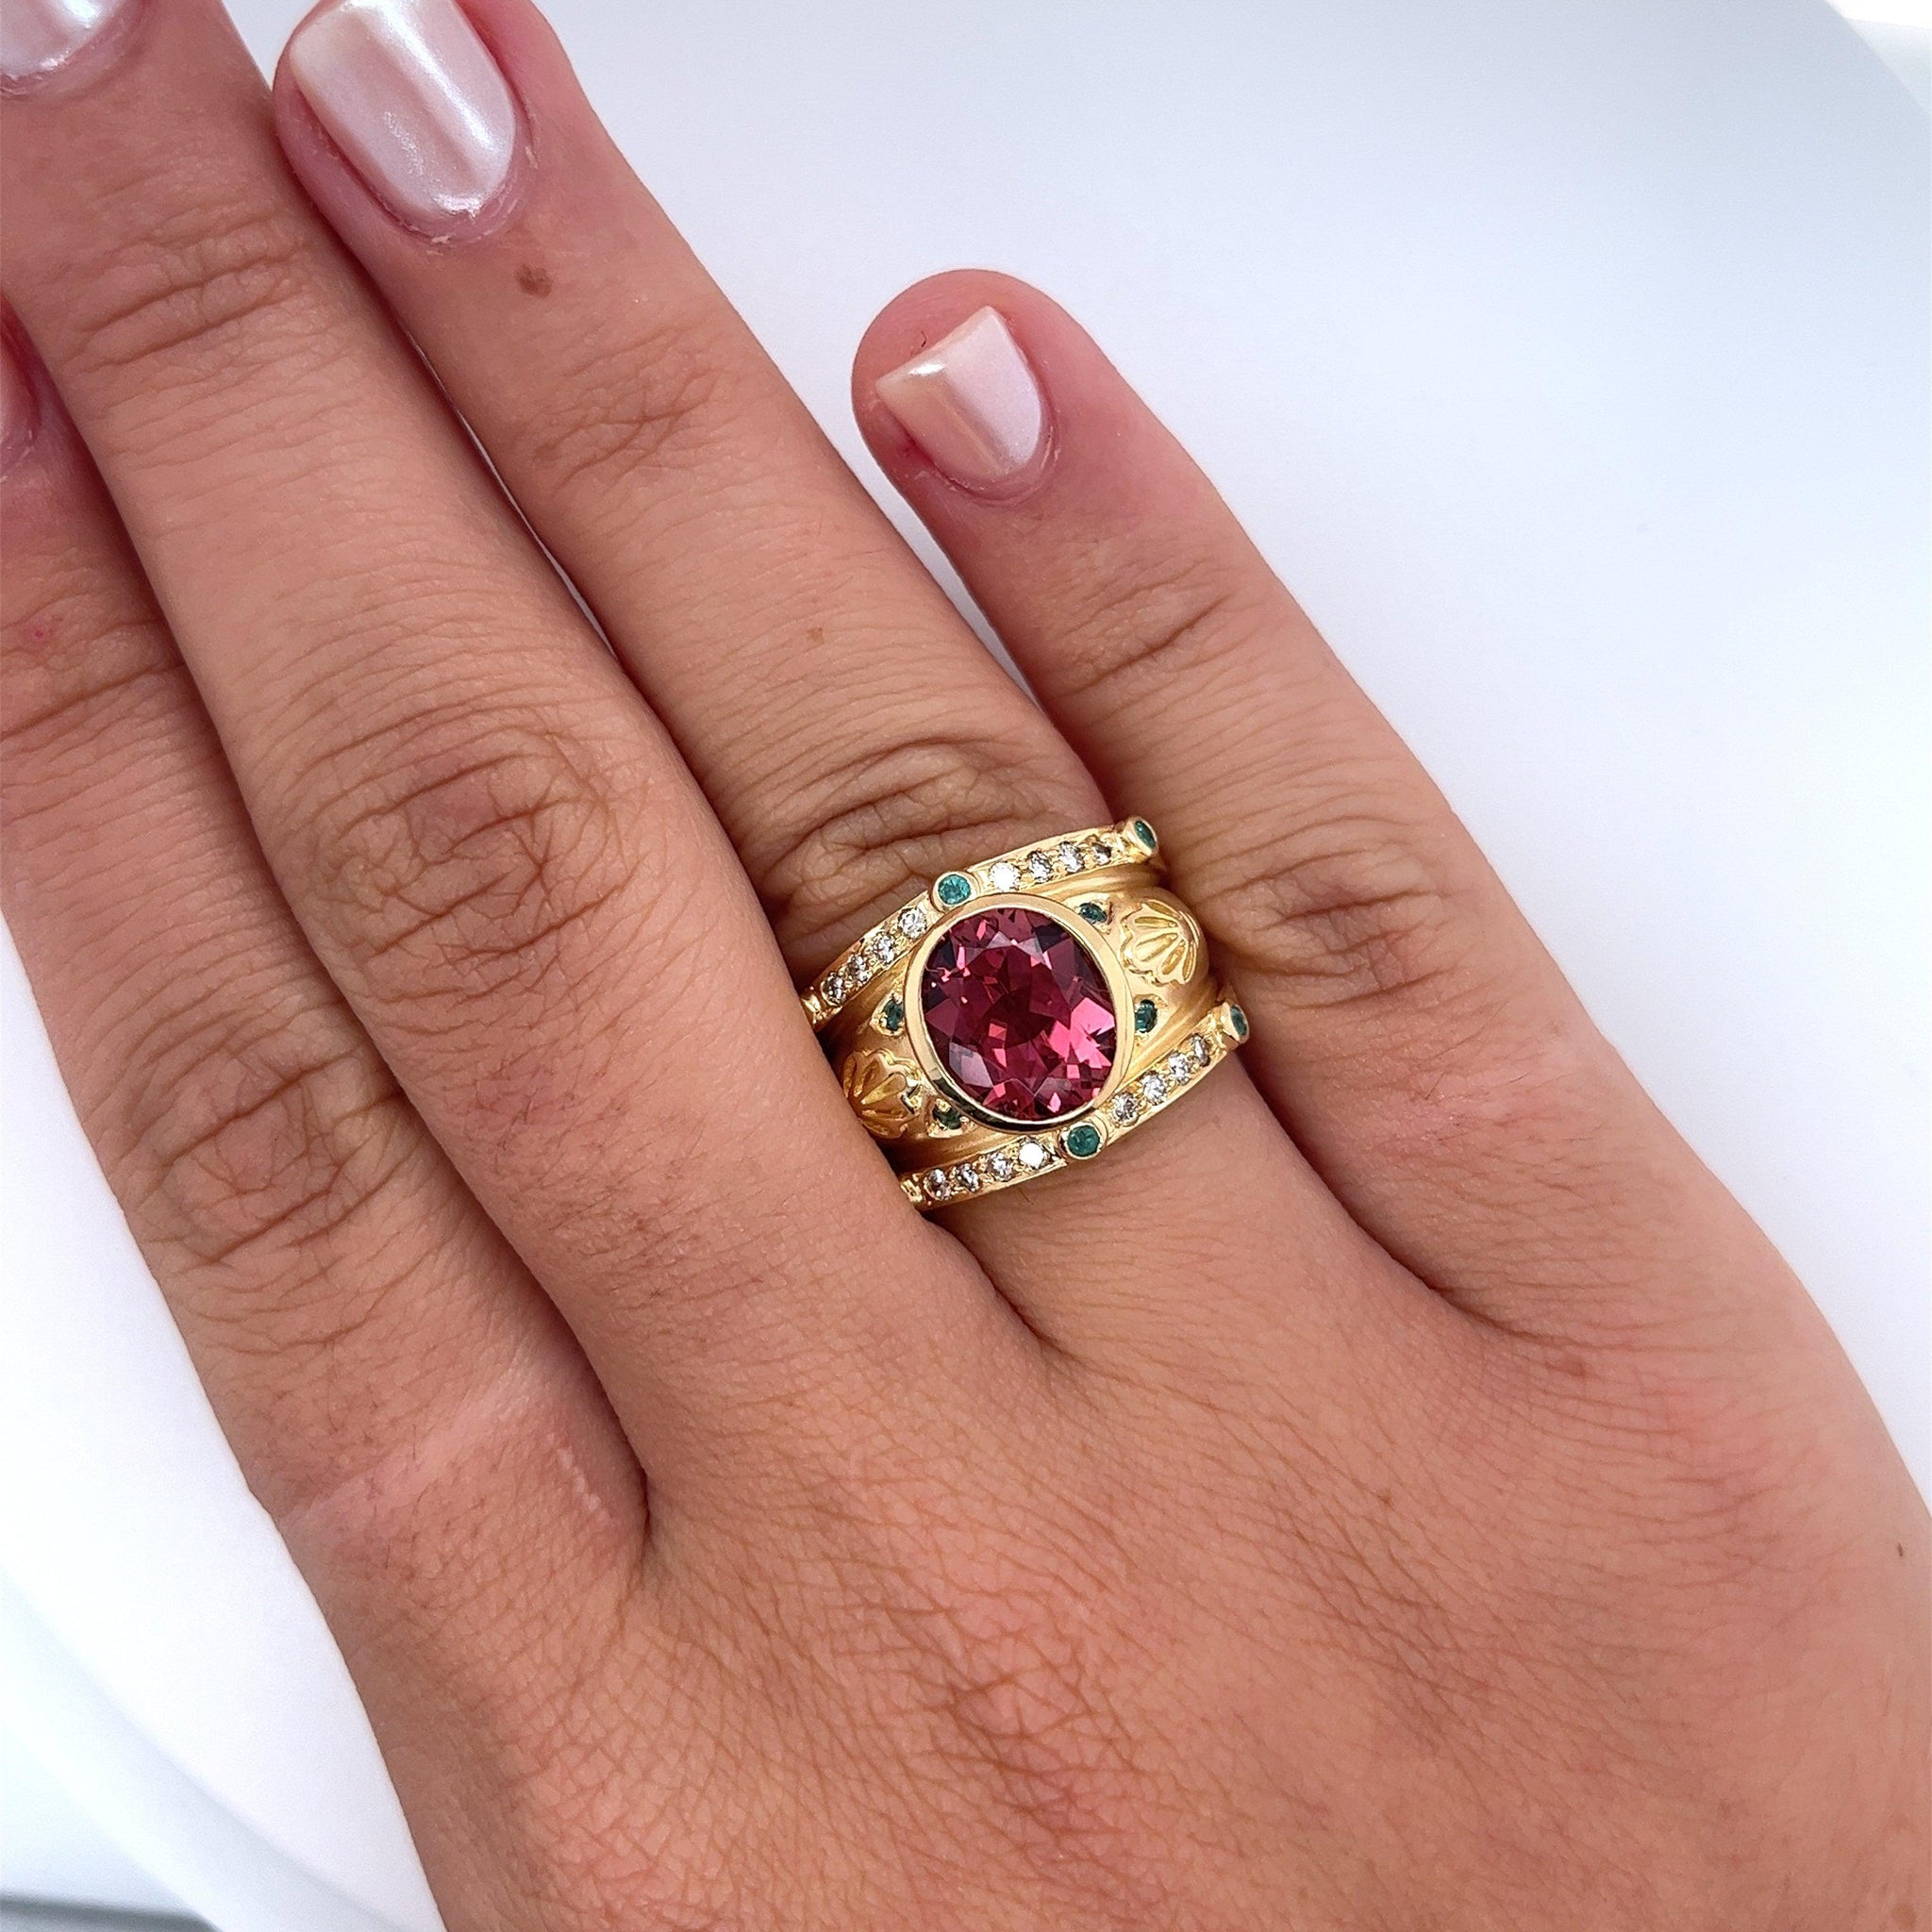 Vintage 6 Carat TW Oval Cut Pinkish-Red Tourmaline with Neon Paraiba Tourmaline and Diamond Ring in 18K Gold